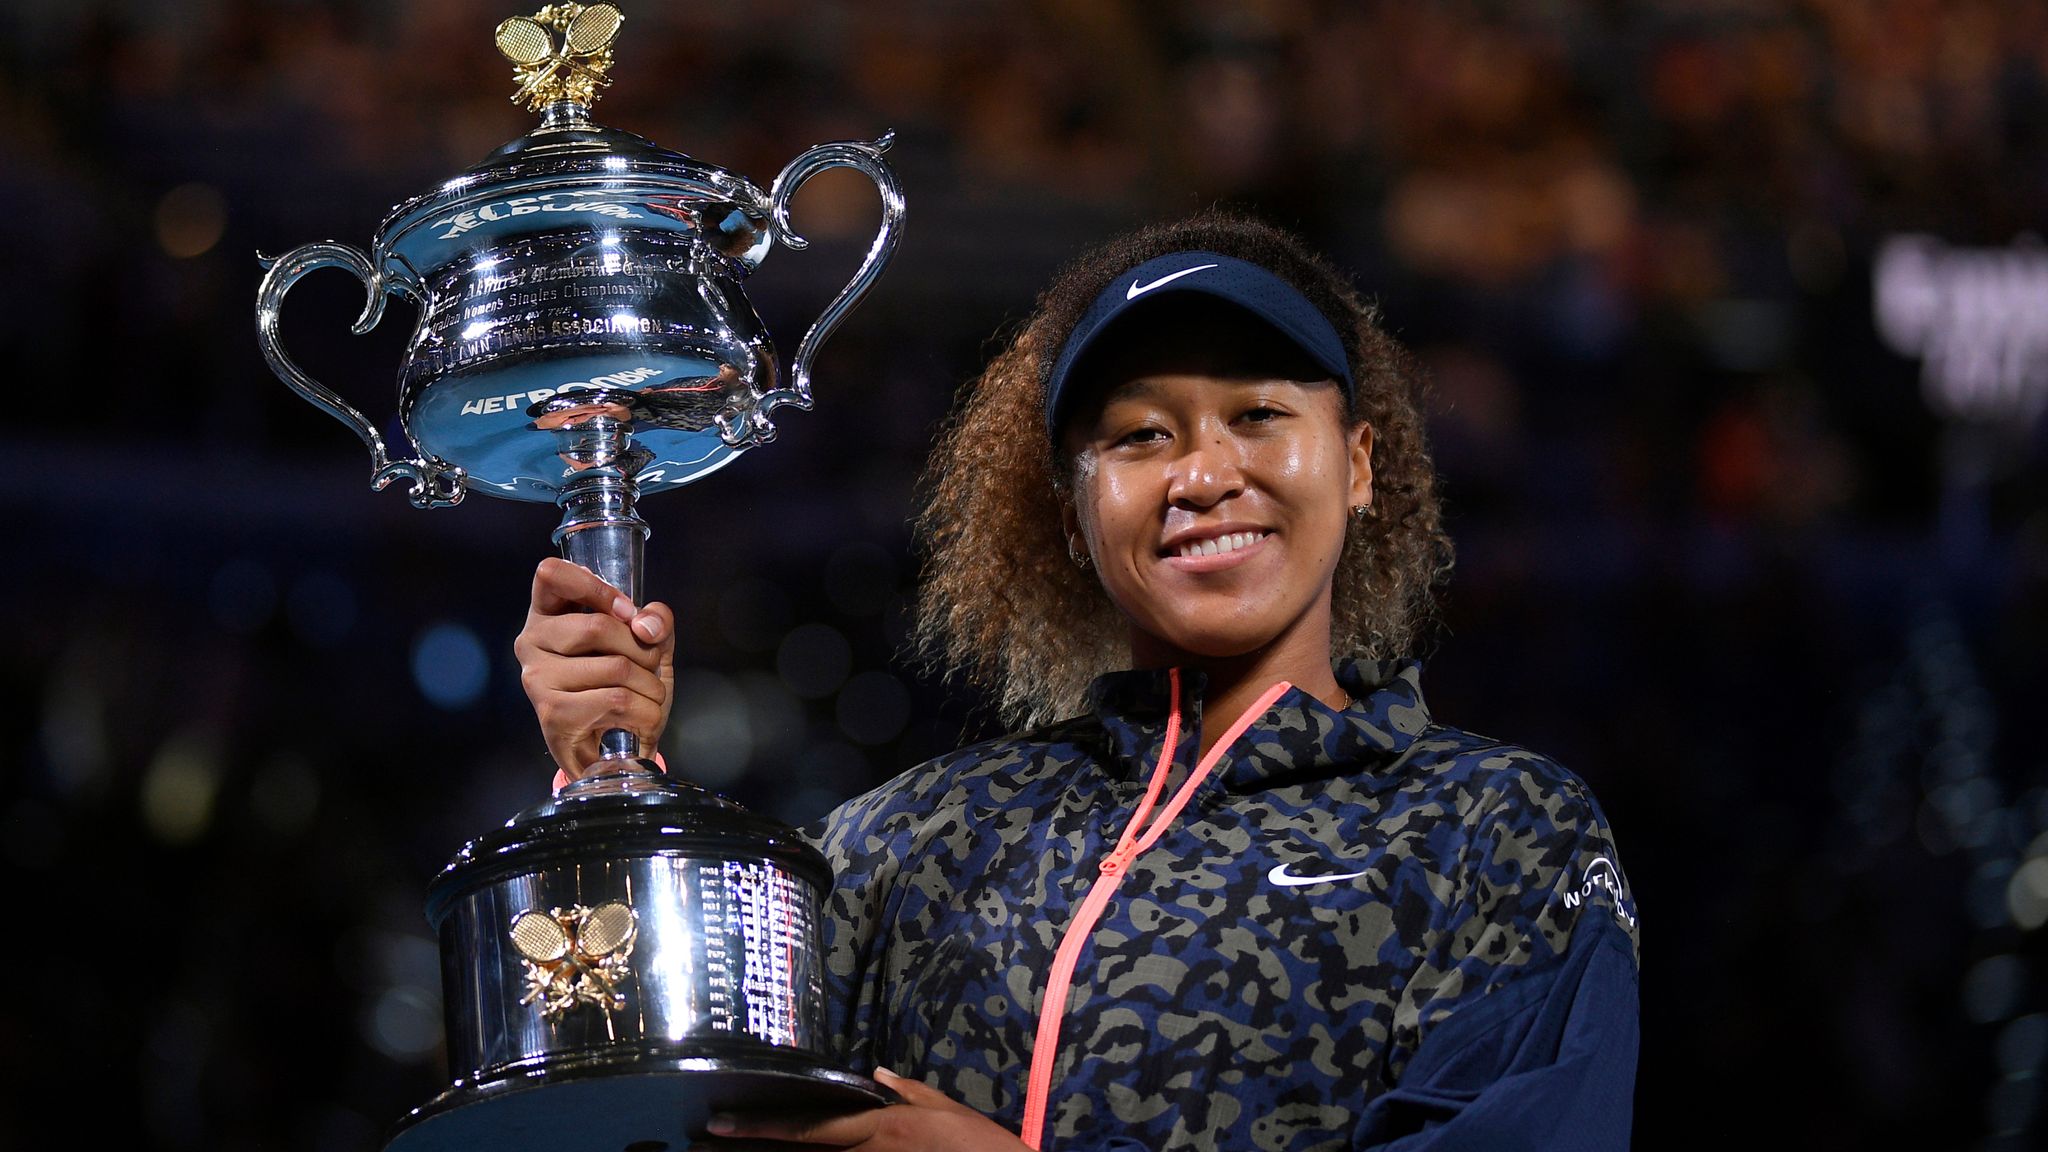 Australian Open: Naomi Osaka claims her second title in Melbourne with victory over Jennifer Brady | Tennis News | Sky Sports